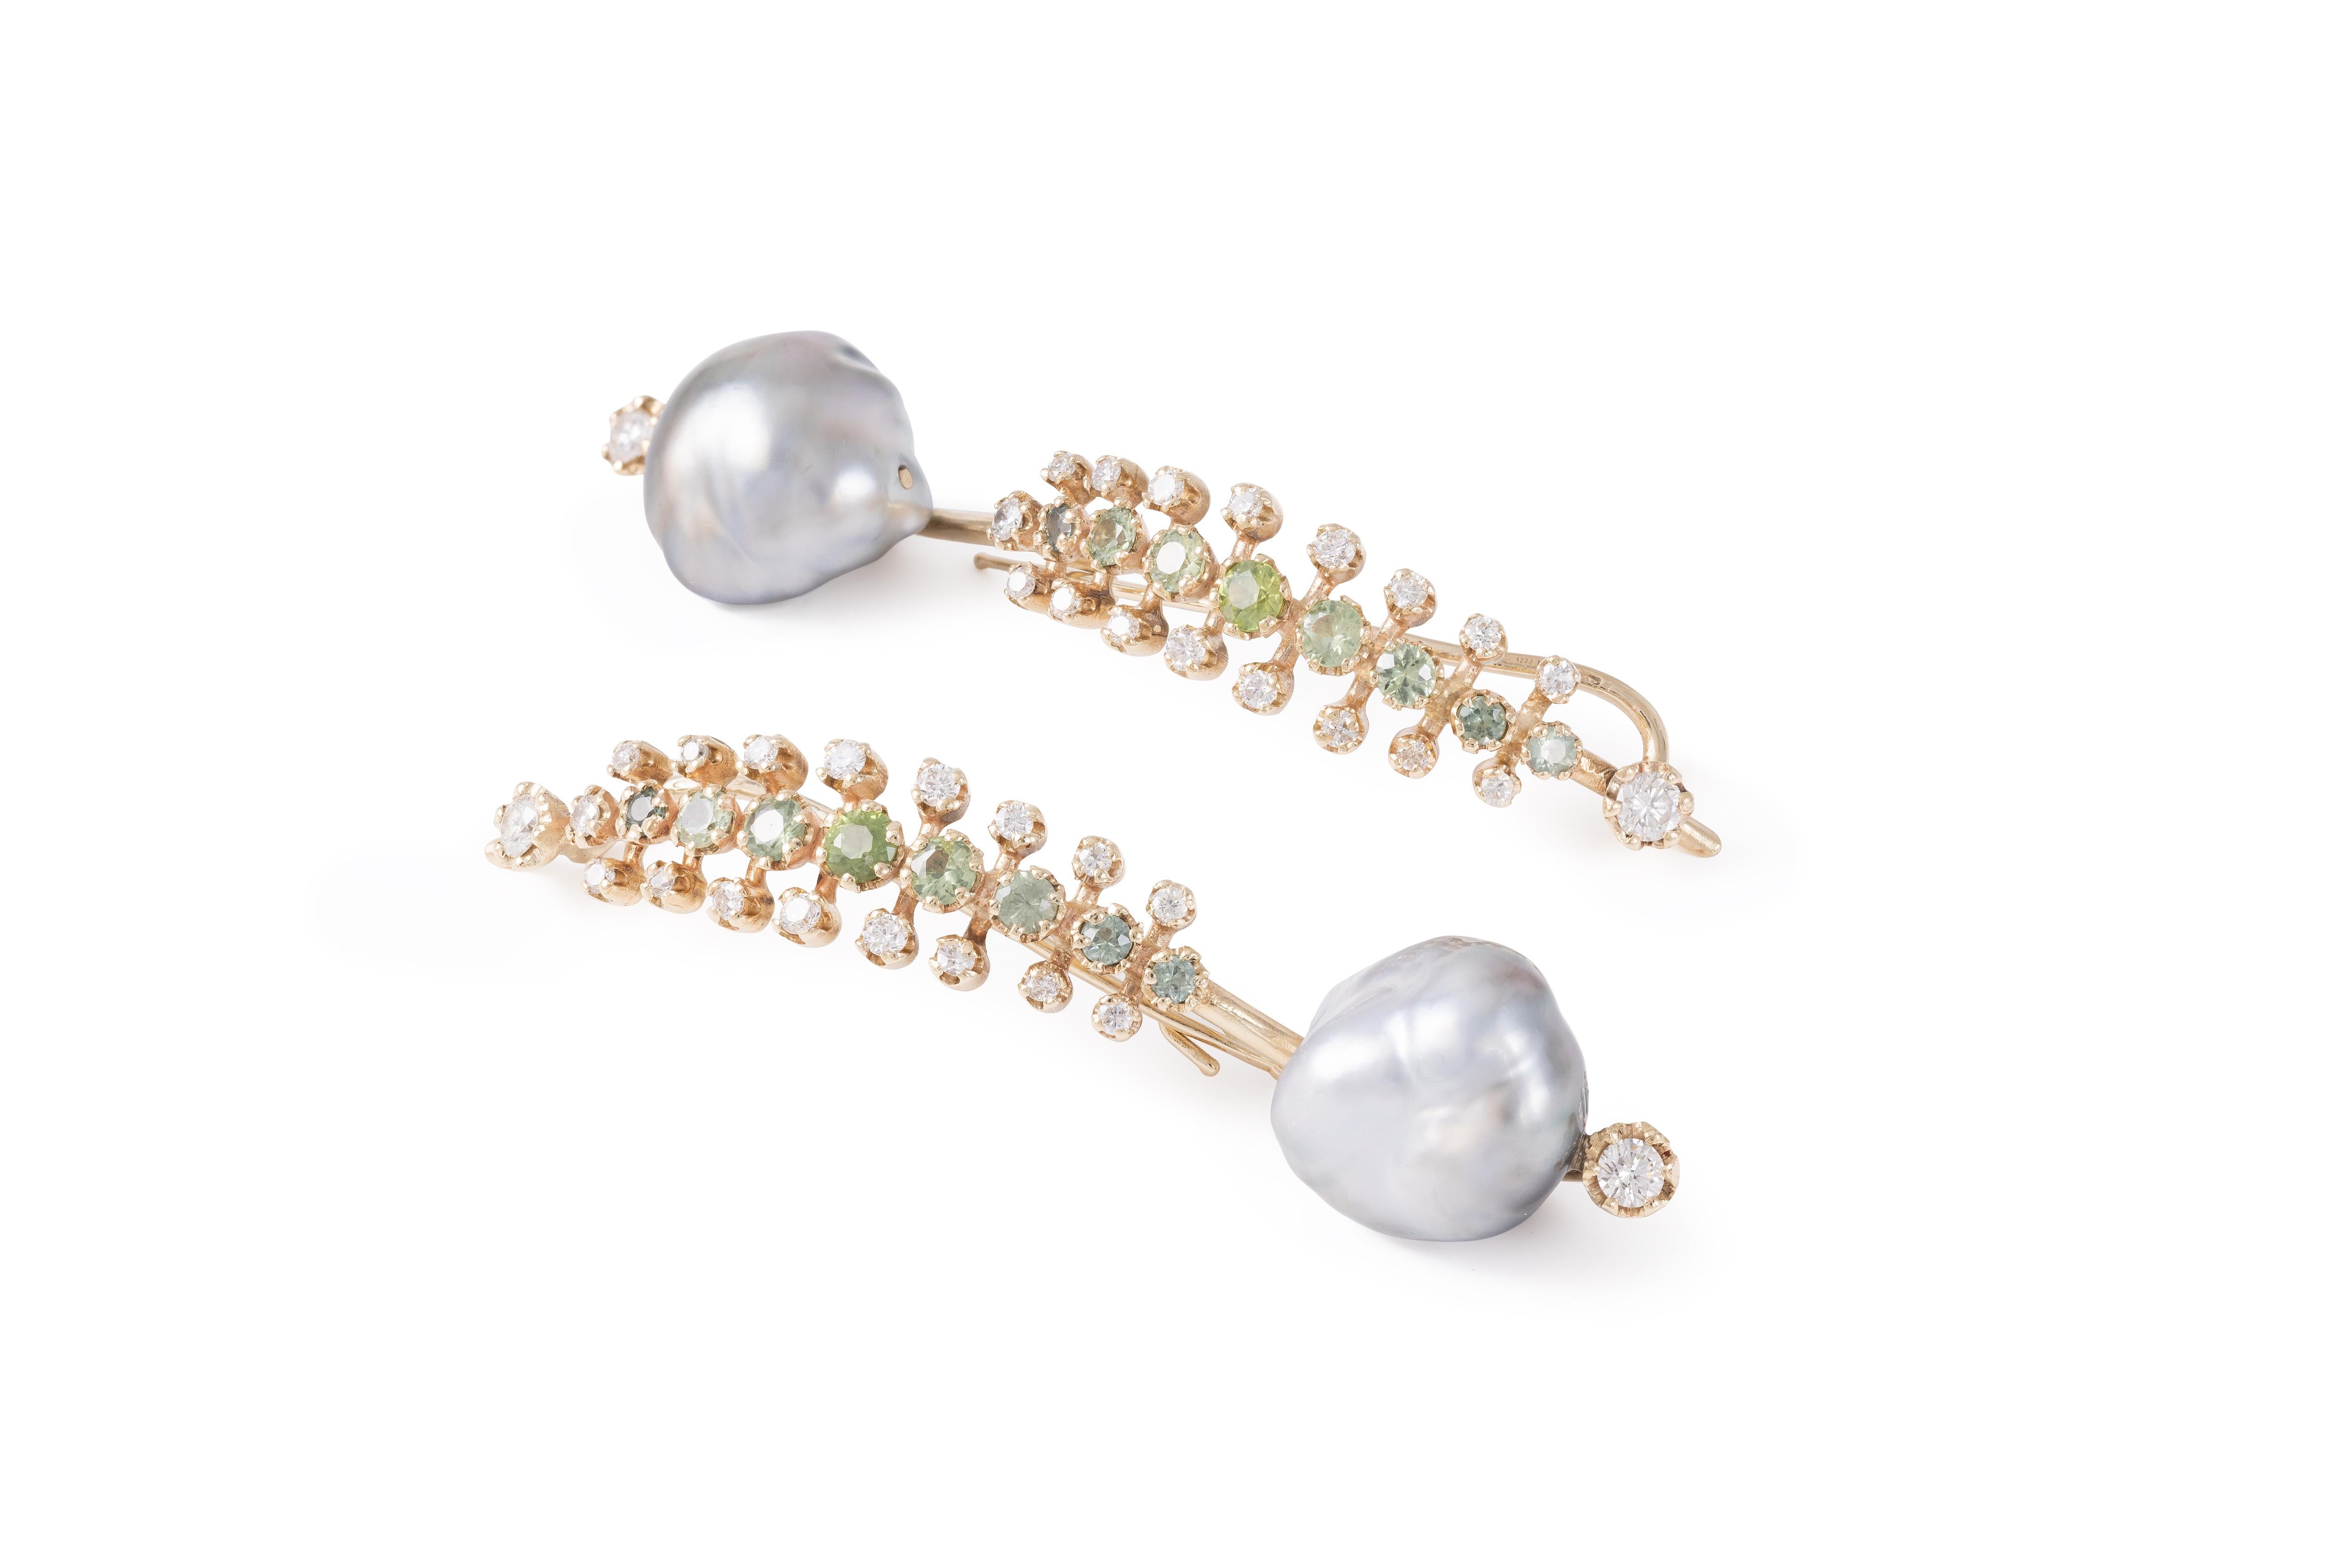 Fly Earrings with Tahiti Pearls by Regina Gambatesa at Second Petale Gallery


About the Gemstones :
Gold 18 kt, grey gold
Diamonds ct 0,84
Green sapphire ct 1,30
Tahiti pearls ct. 20,50

ABOUT the CREATOR
REGINA GAMBATESA: AN ARTIST OF SPIRIT AND